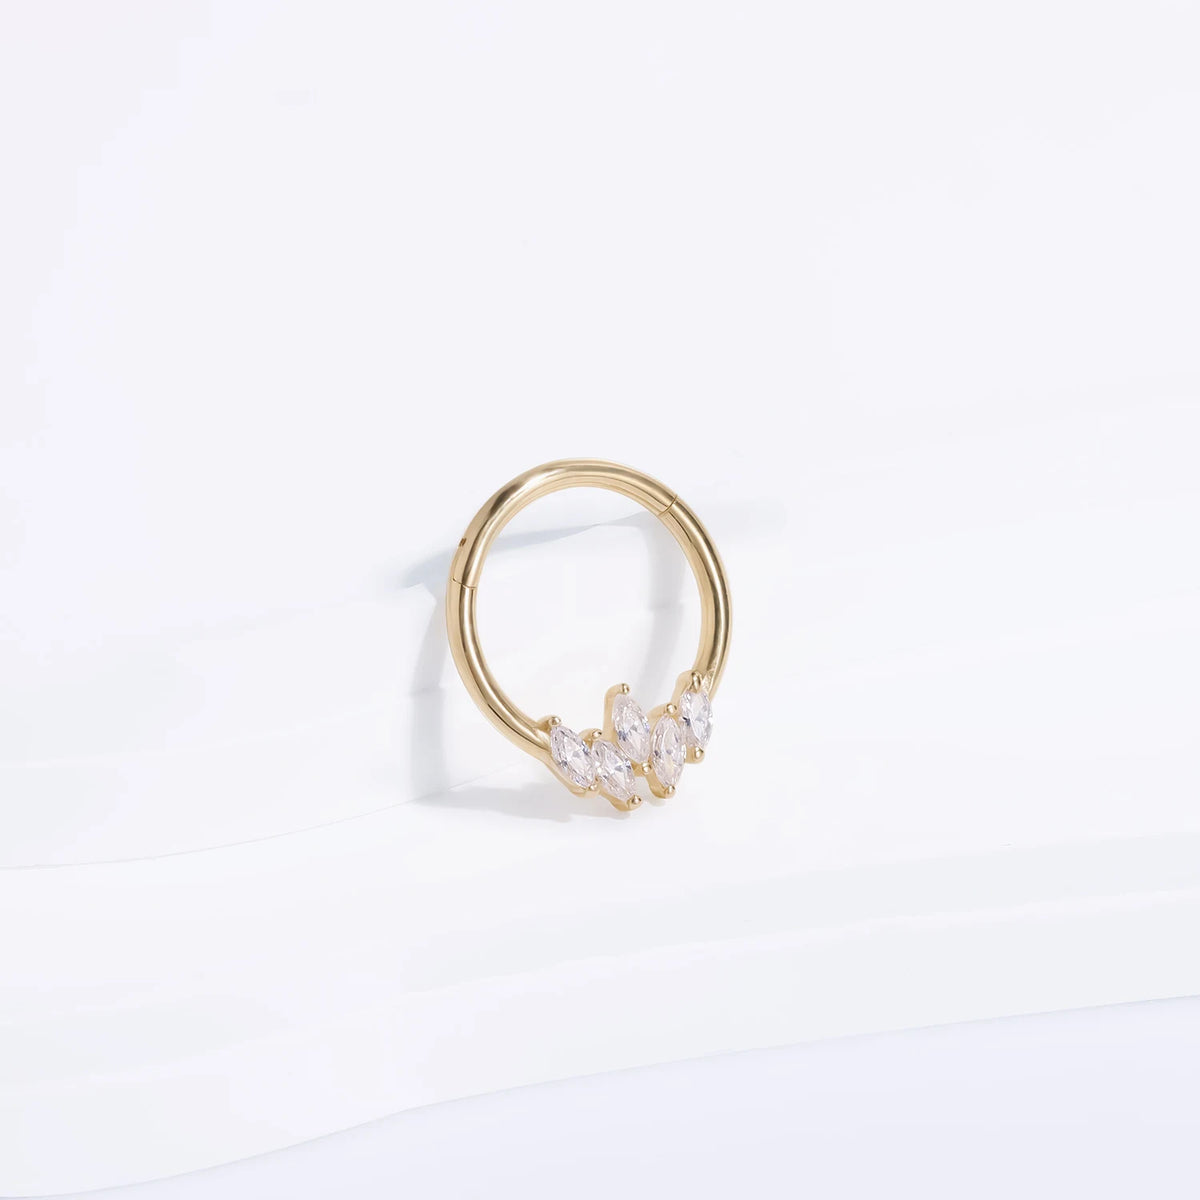 14k gold septum ring with clear CZ stones solid gold hinged segment clicker ring nose ring 16G